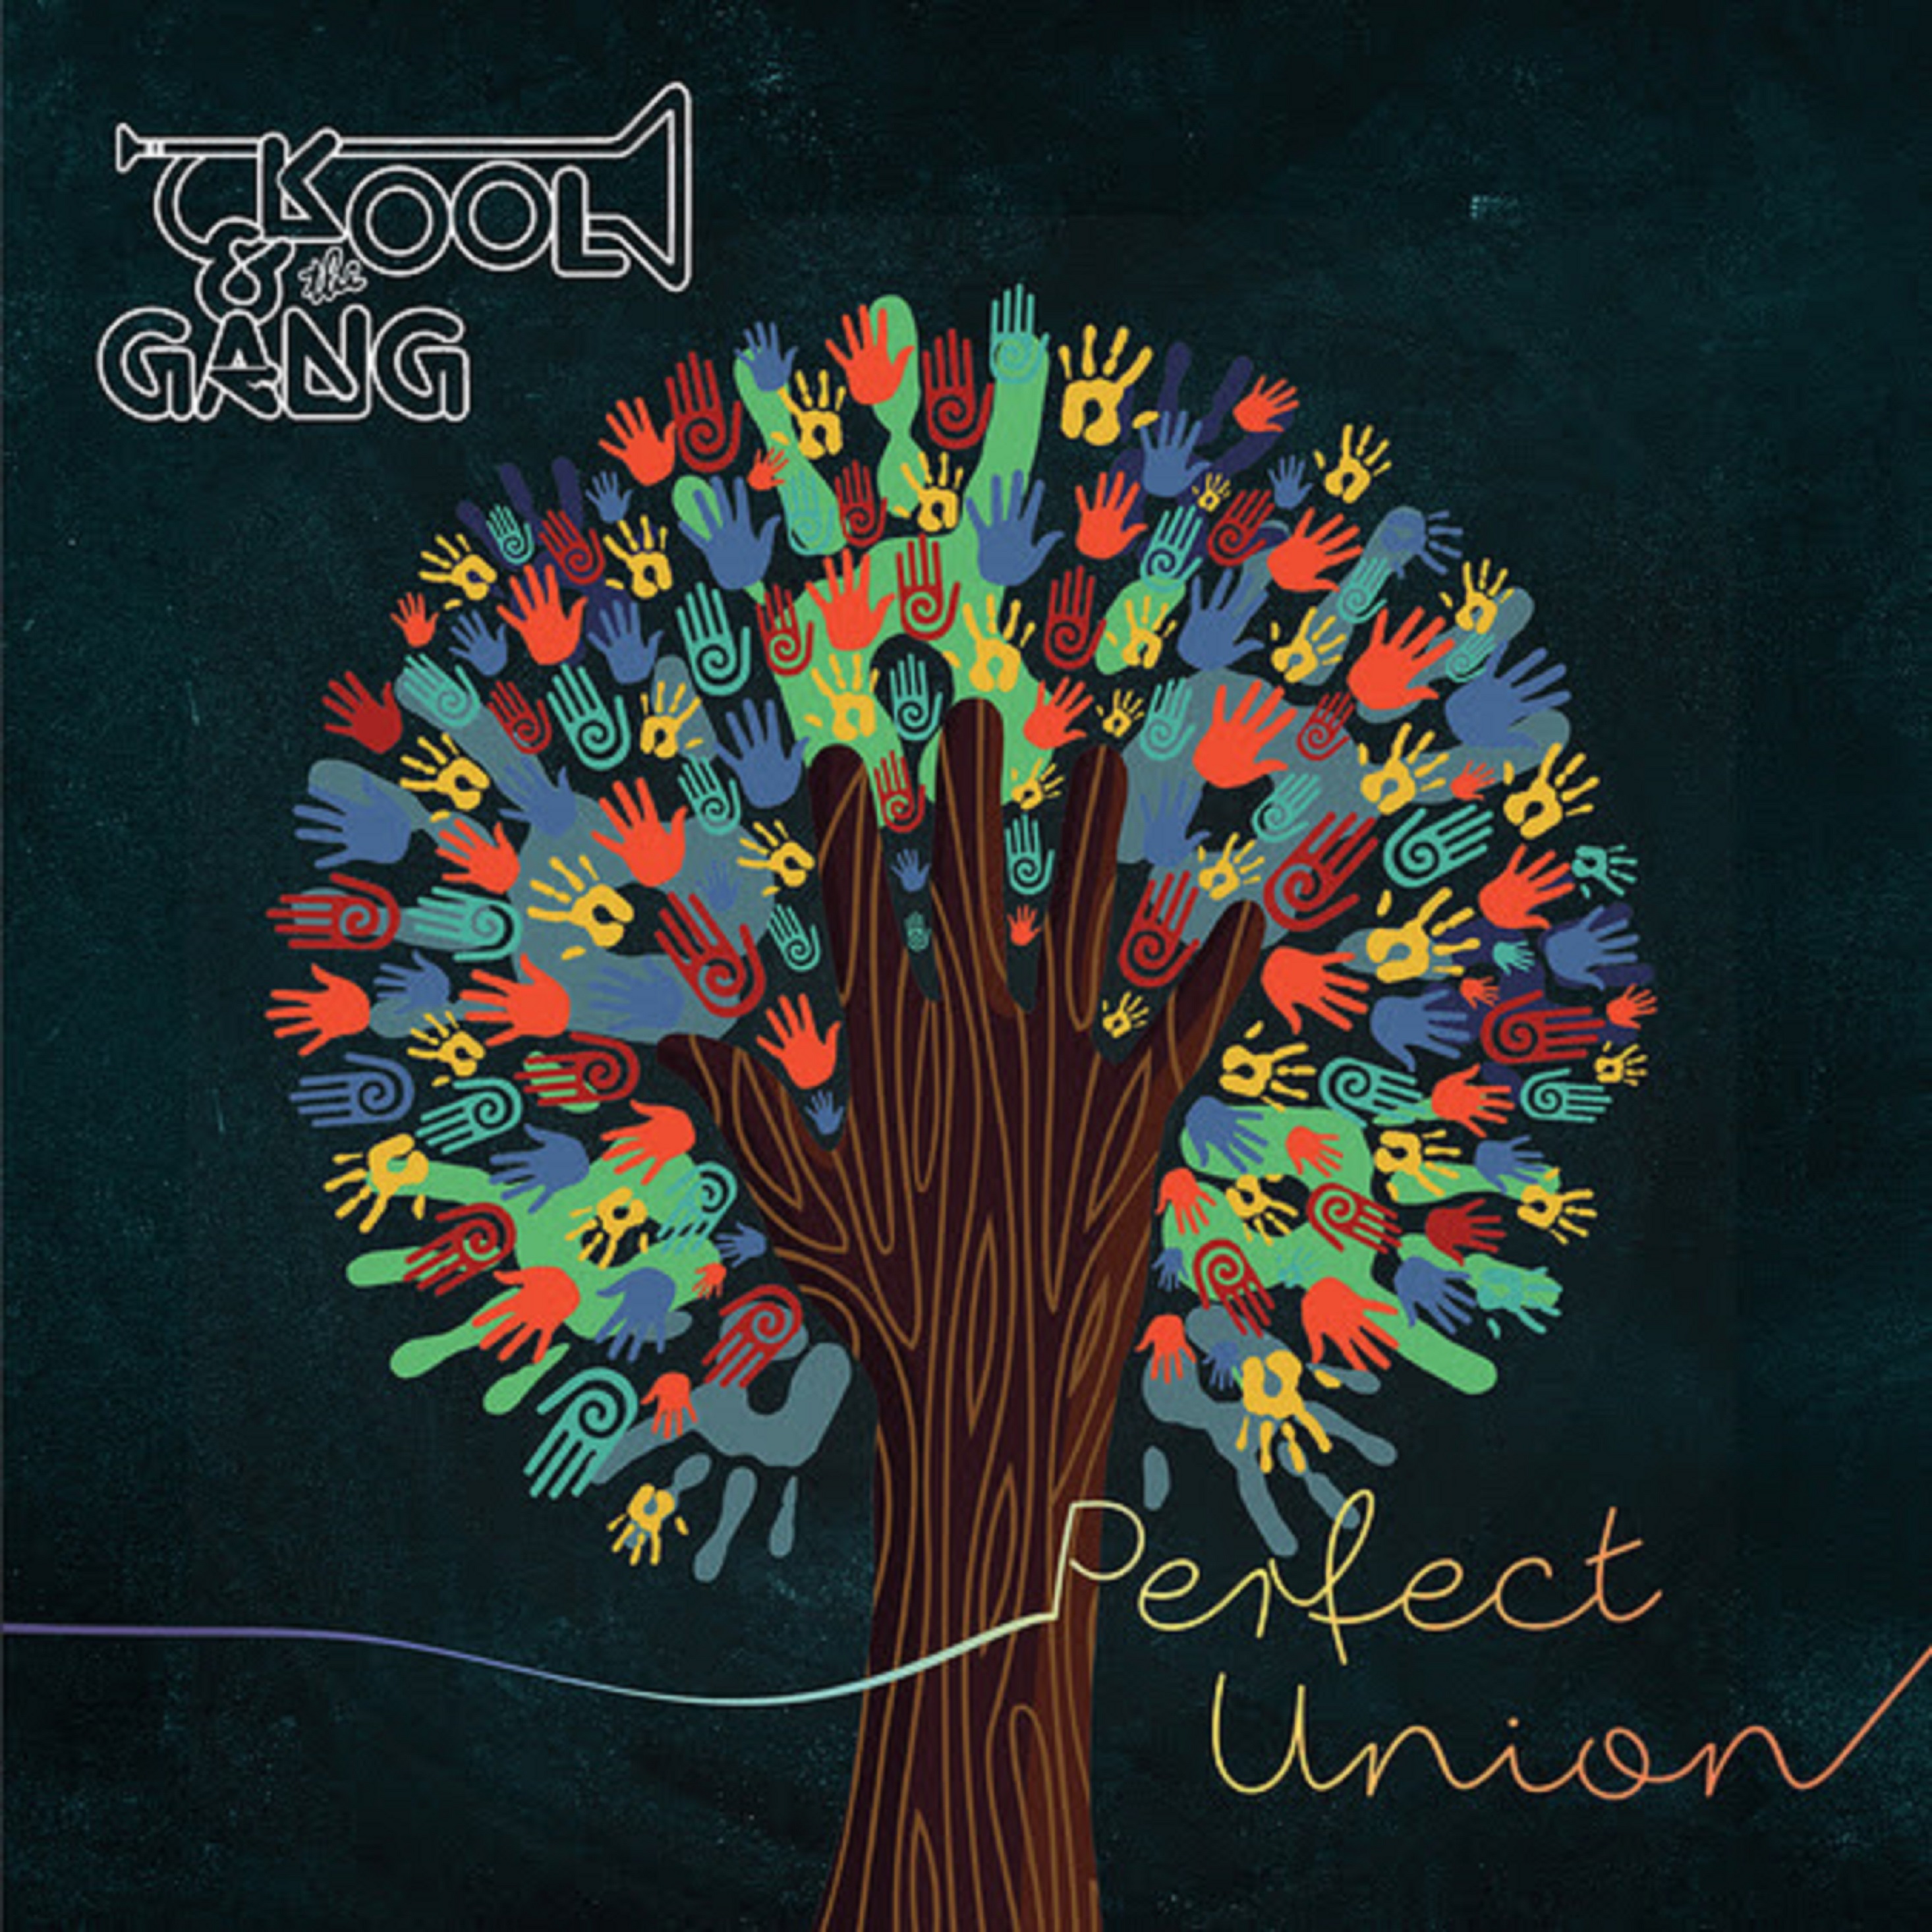 Perfect Touch + Kool and the gang ネット店舗 - www